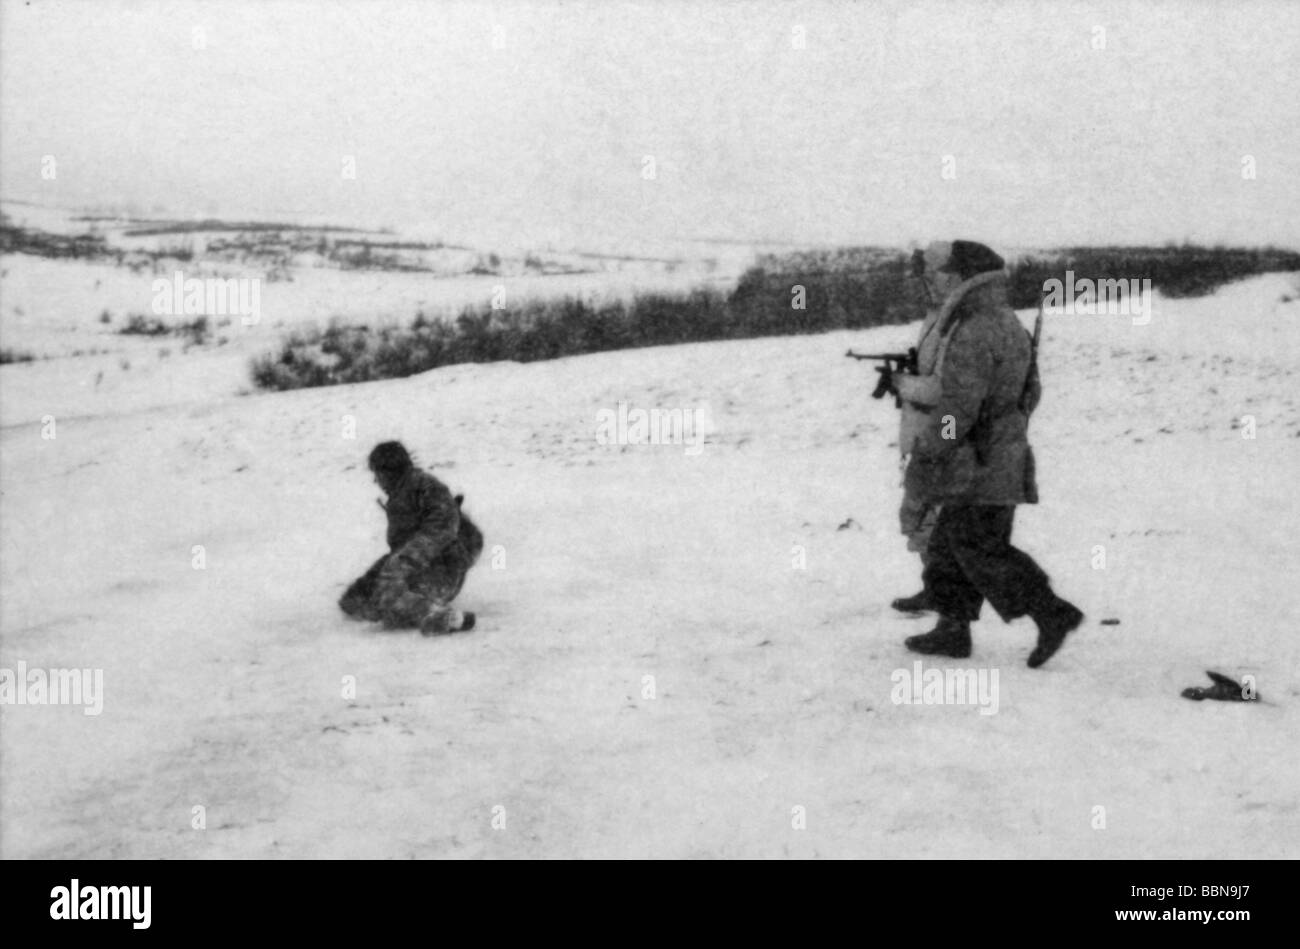 events, Second World War / WWII, Russia 1944 / 1945, German counterattack near Britskoye, Ukraine, late January 1944, German soldiers taking a Soviet soldier prisoner, Eastern Front, historic, historical, winter, snow, USSR, Soviet Union, 20th century, historic, historical, Red Army, losses, POW, POWs, winter clothes, Wehrmacht, submachine gun, 1940s, people, Stock Photo